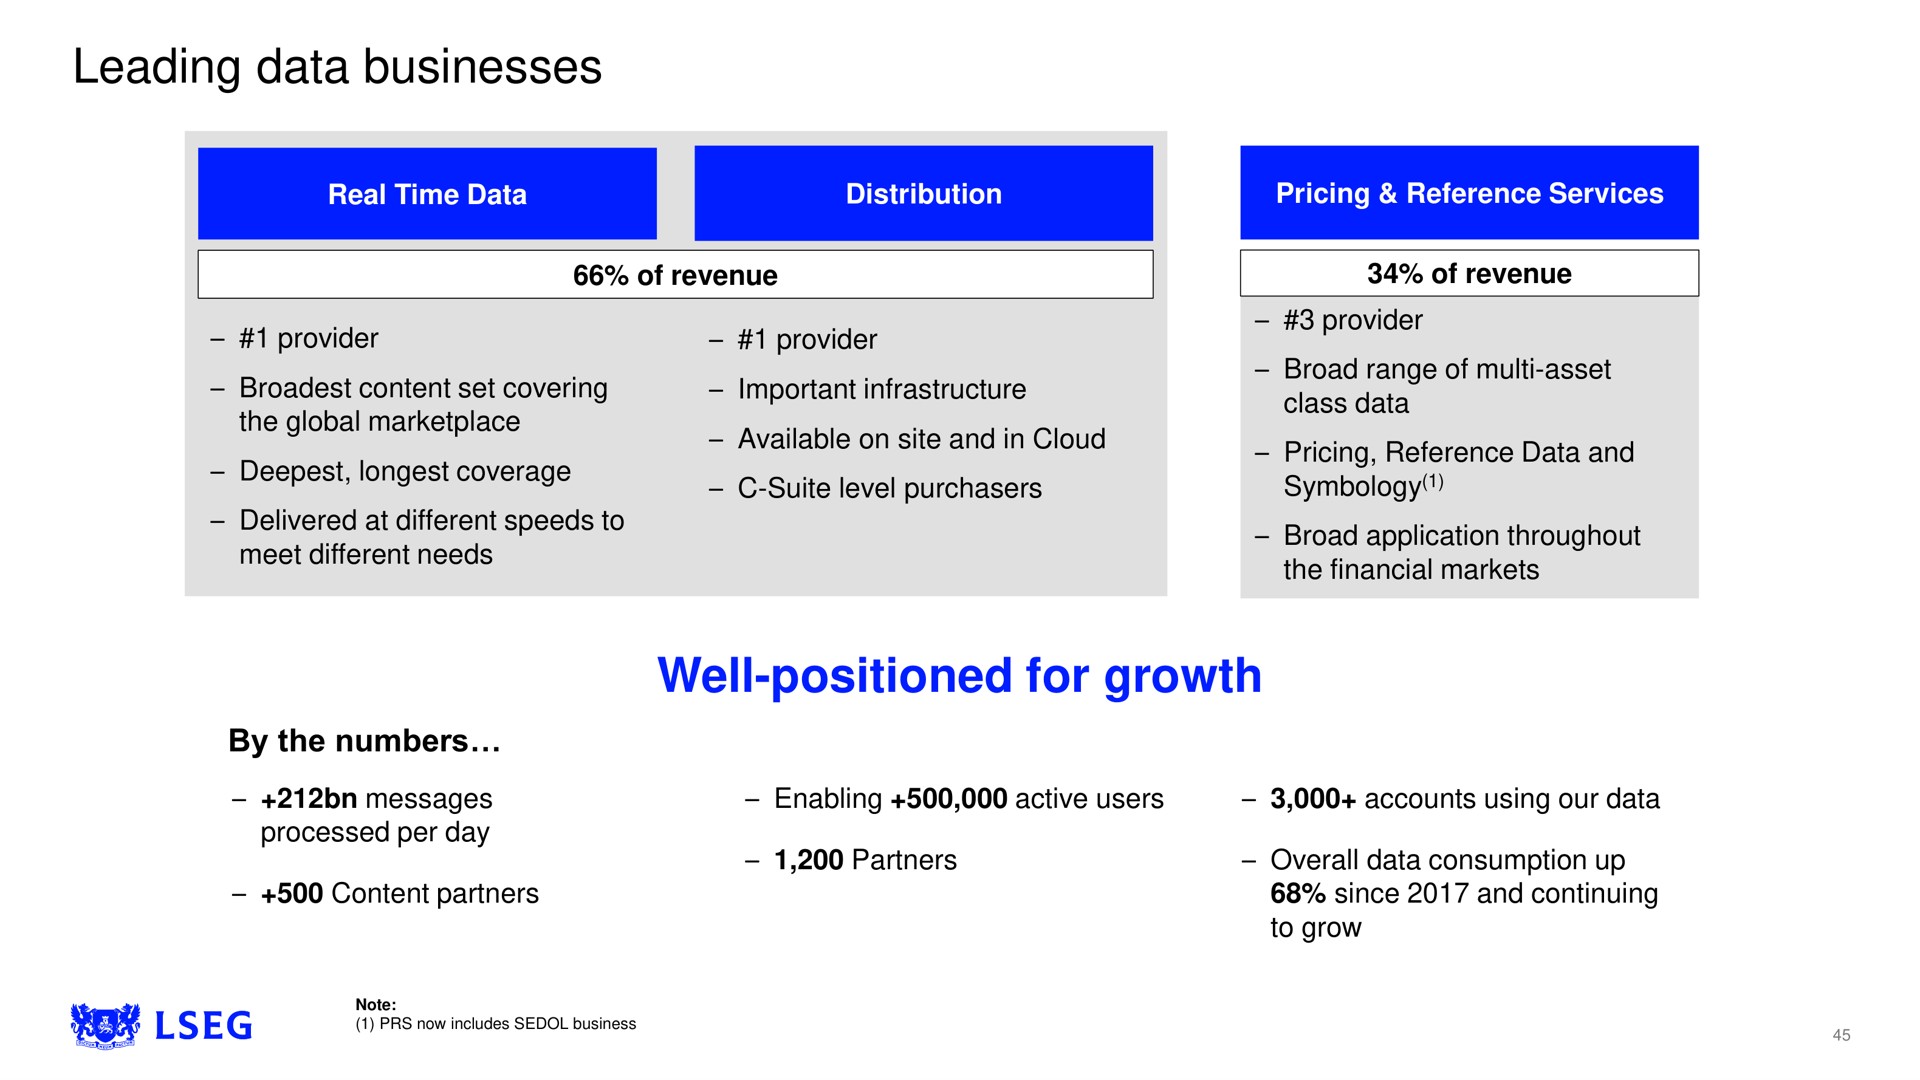 leading data businesses well positioned for growth | LSE